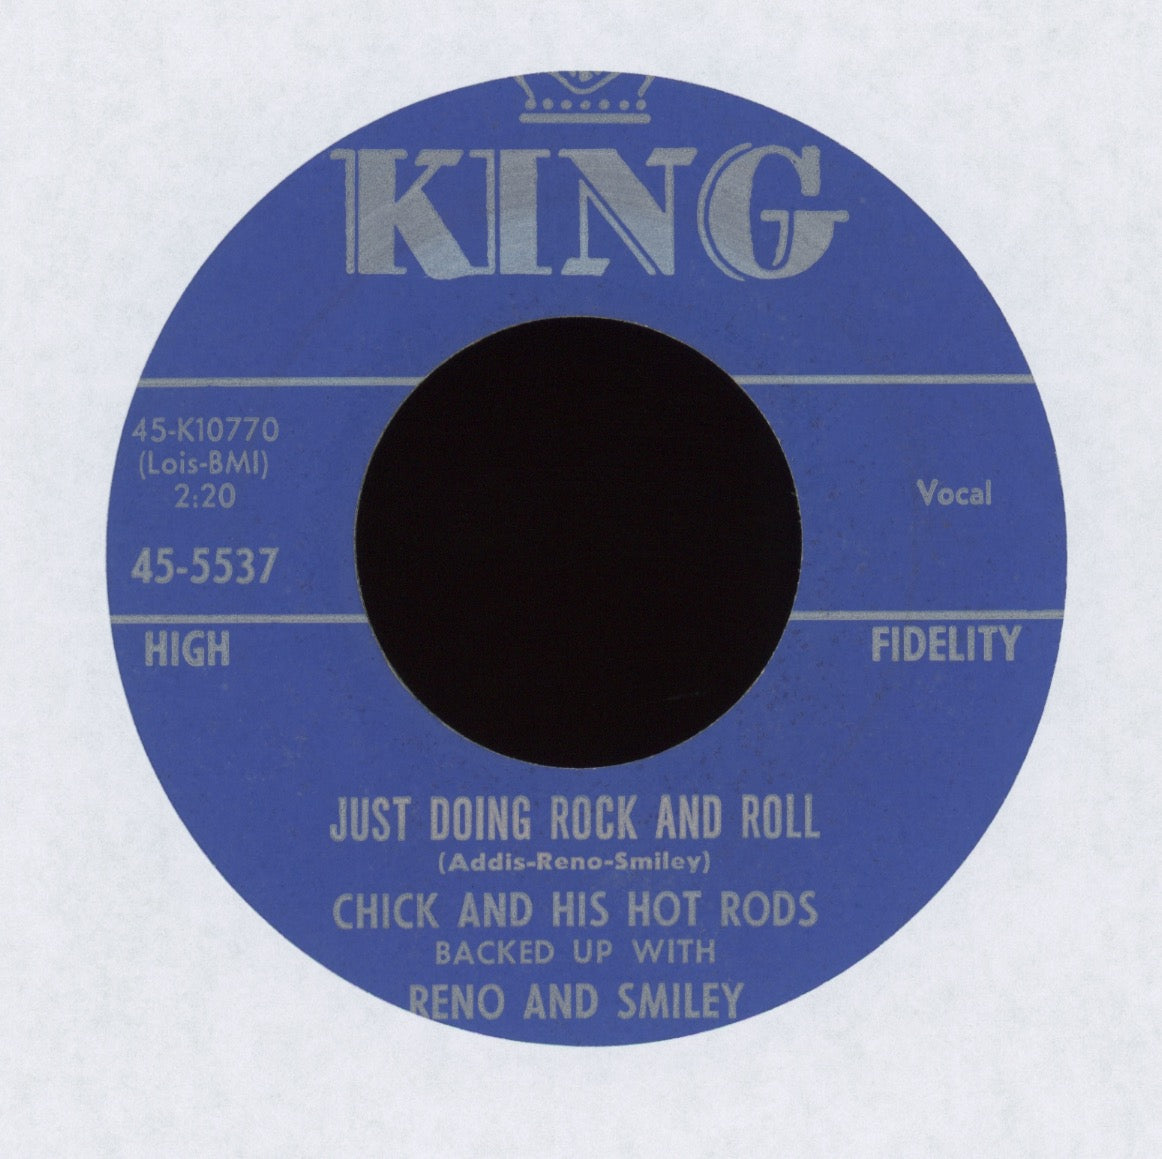 Chick And His Hot Rods - Just Doing Rock And Roll on King